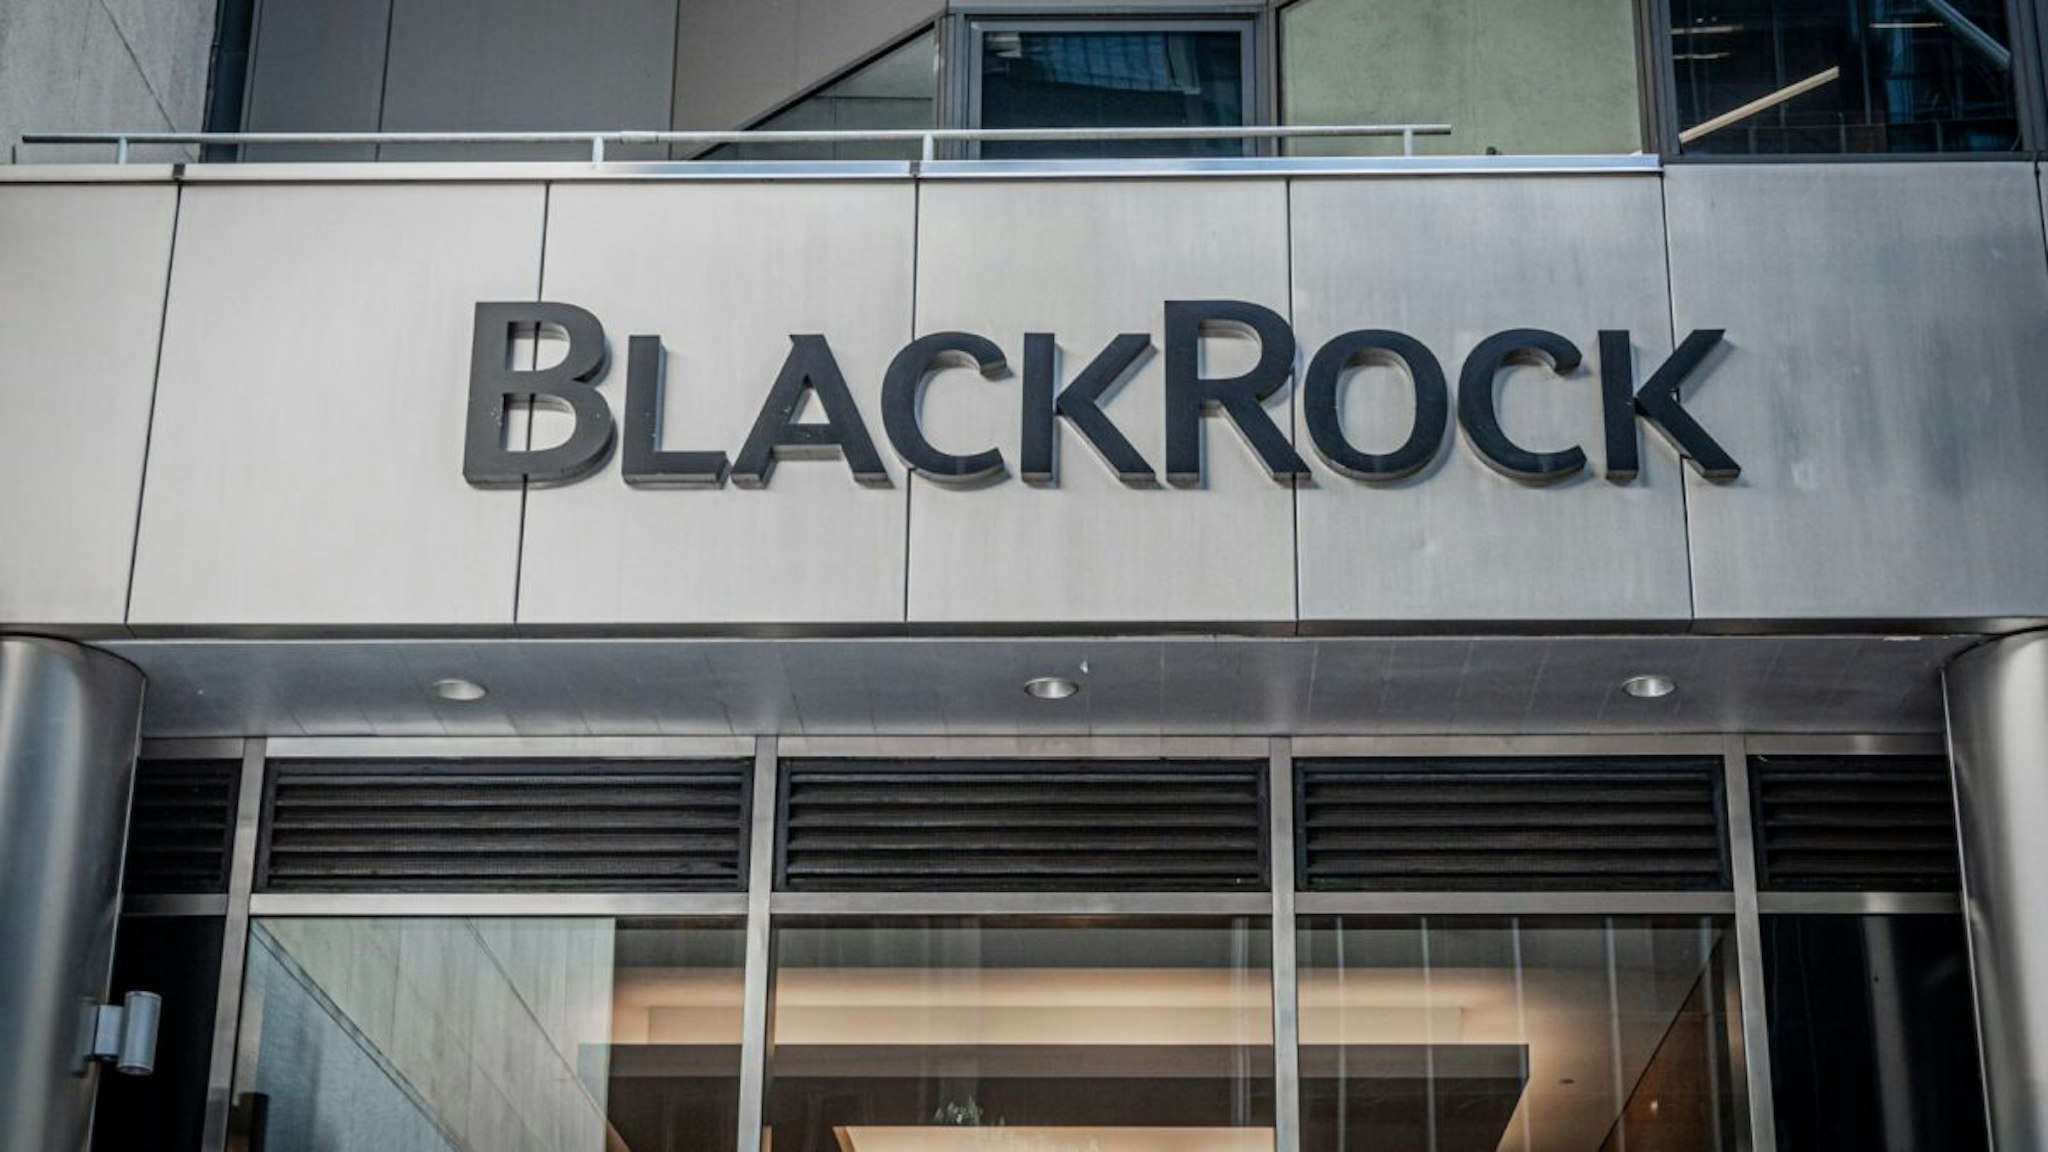 Logo at the main entrance to the BlackRock Headquarters building in Manhattan.